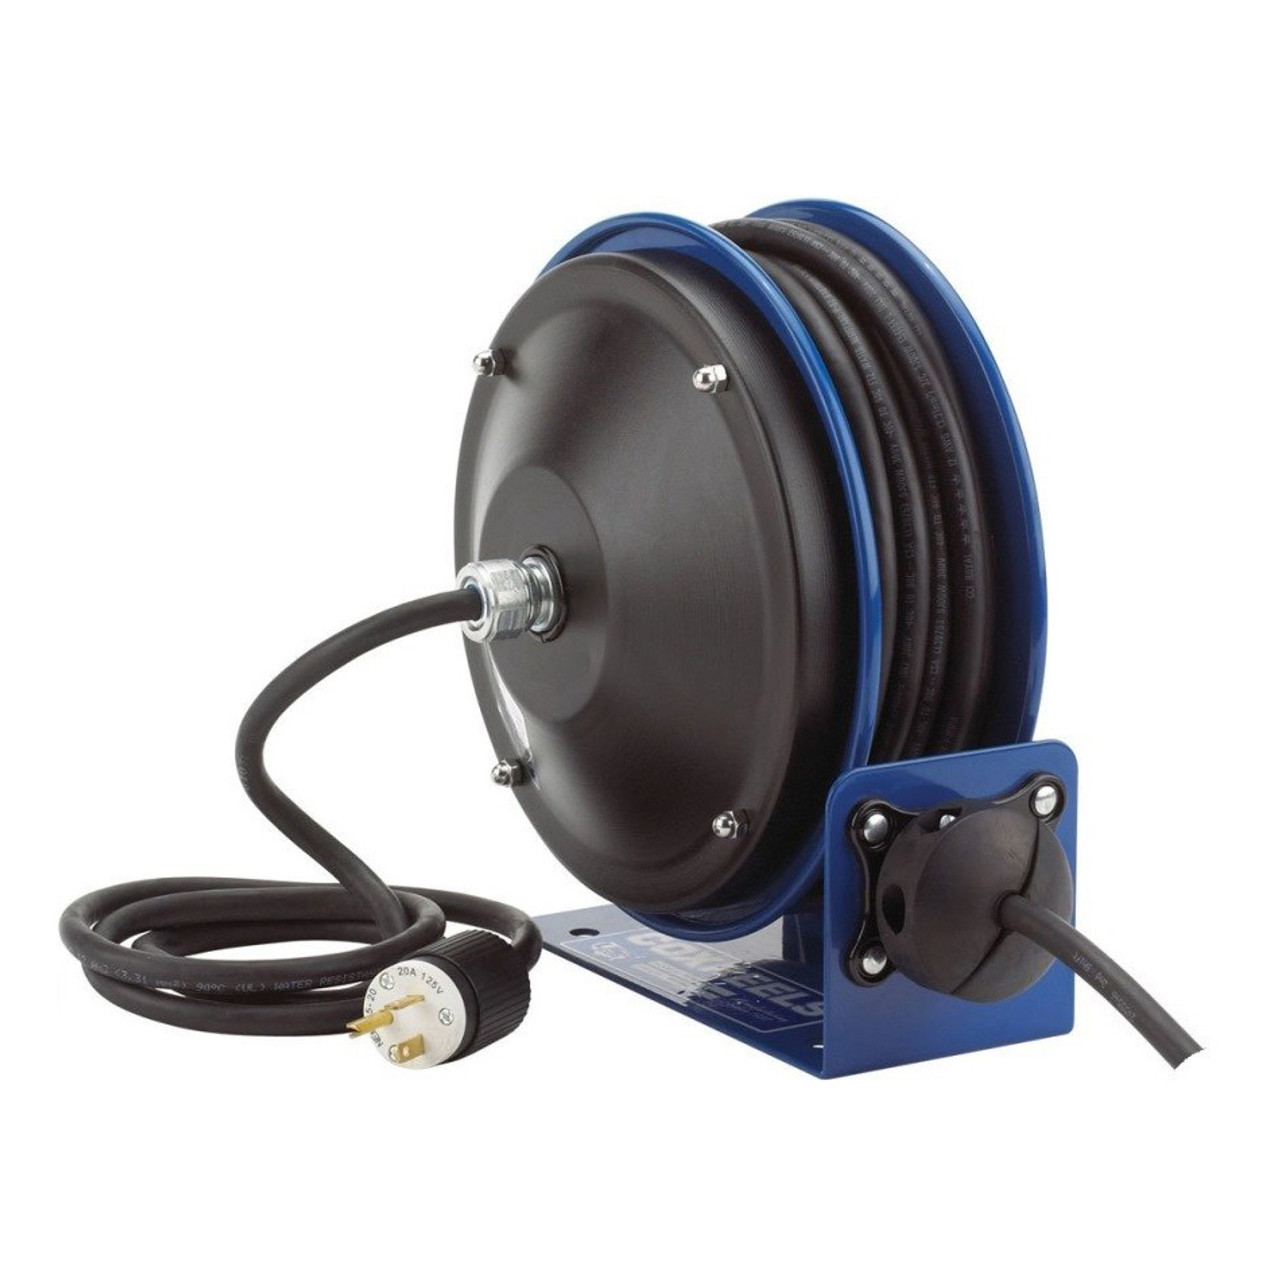 Coxreels PC10 Series Compact Power Cord Reel - 30 ft., 12/3 Cord